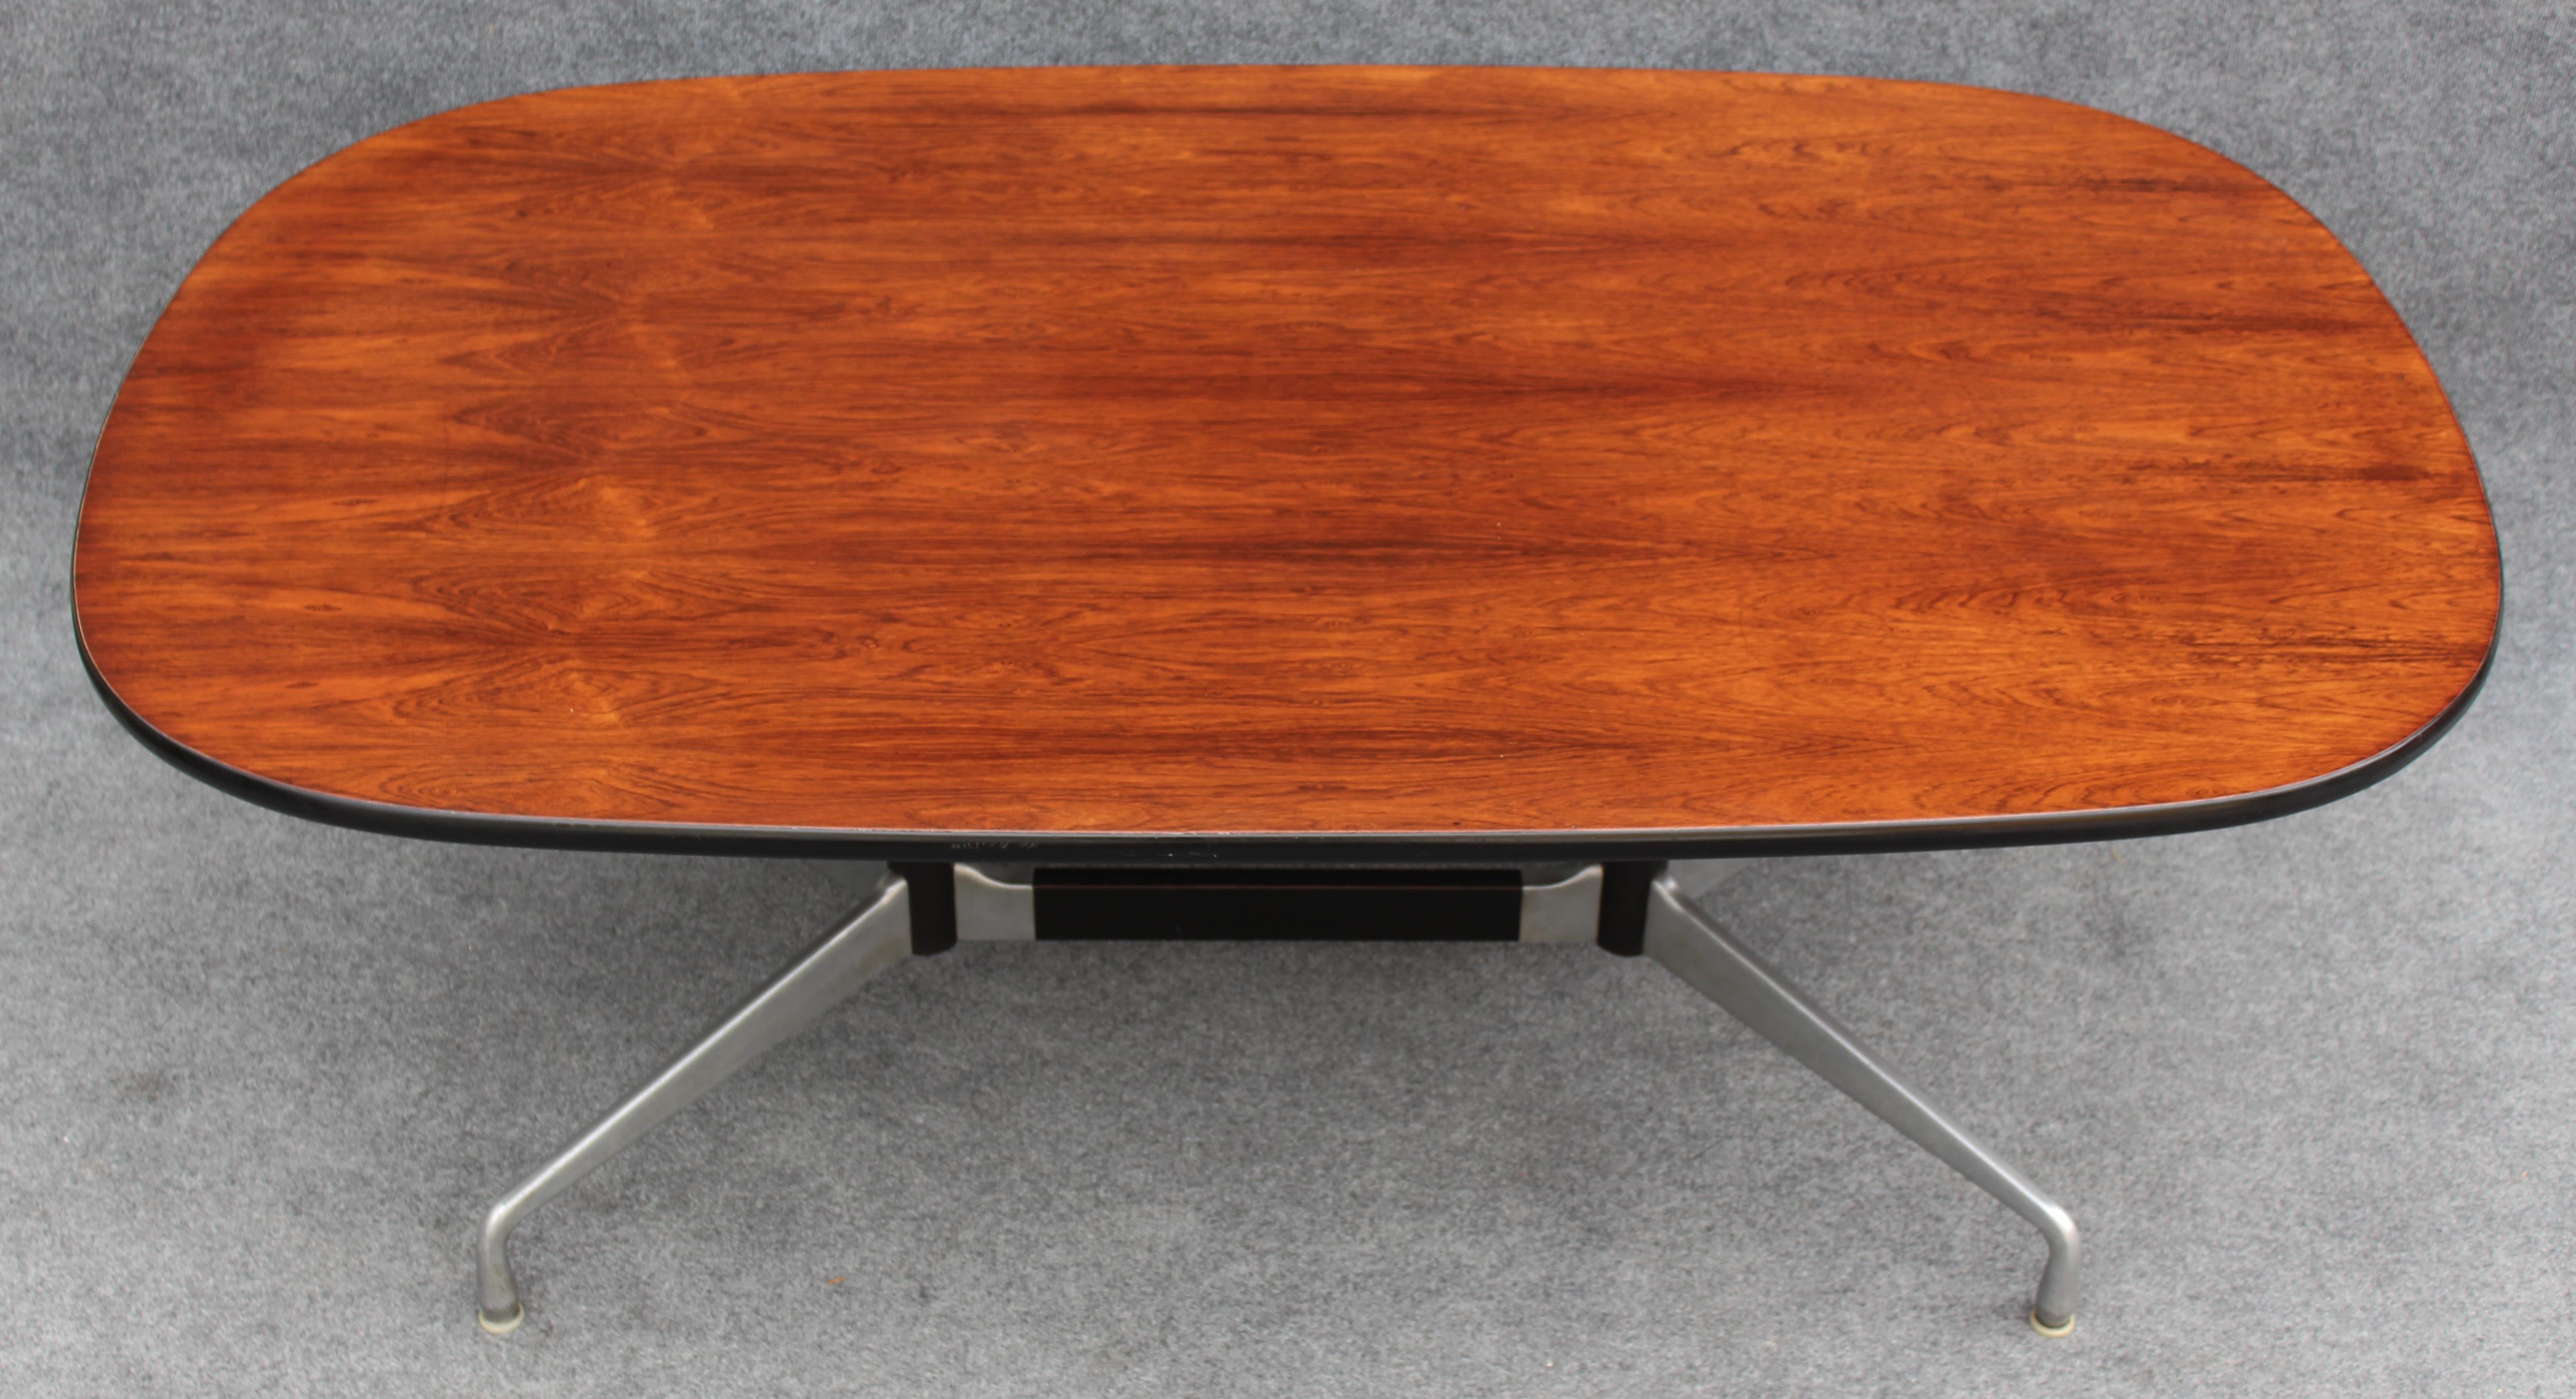 This rare table was designed by Charles and Ray Eames in the early 1960s for Herman Miller, the producer of all Eames designs at the time. It was not widely produced at the time, and very few were made. In fact, this example is likely a custom order